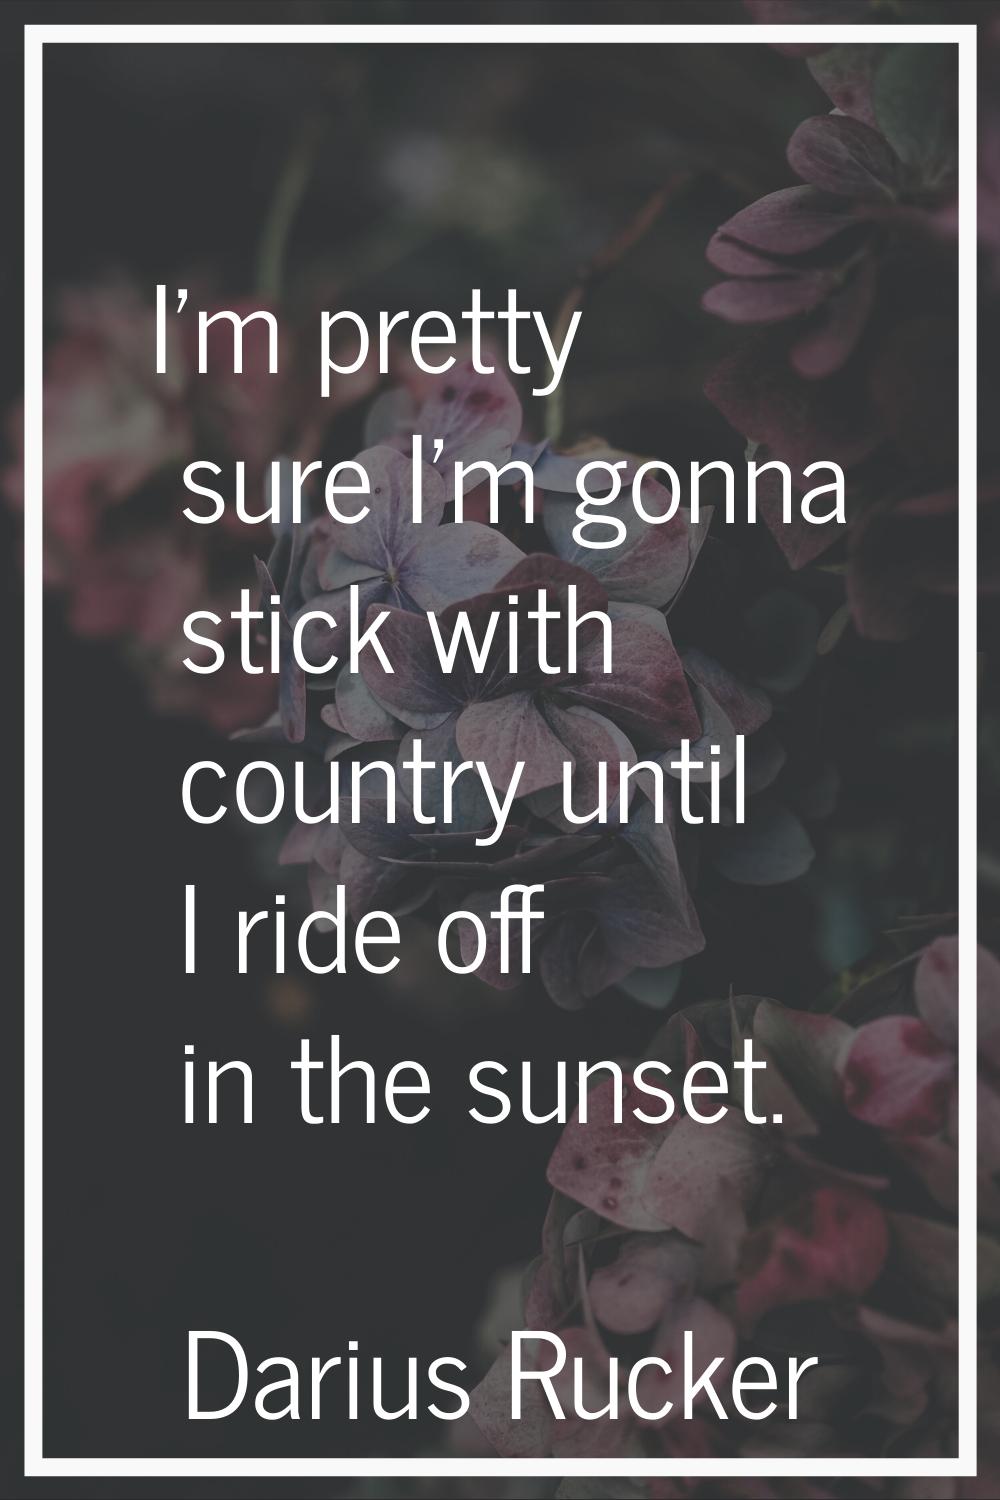 I'm pretty sure I'm gonna stick with country until I ride off in the sunset.